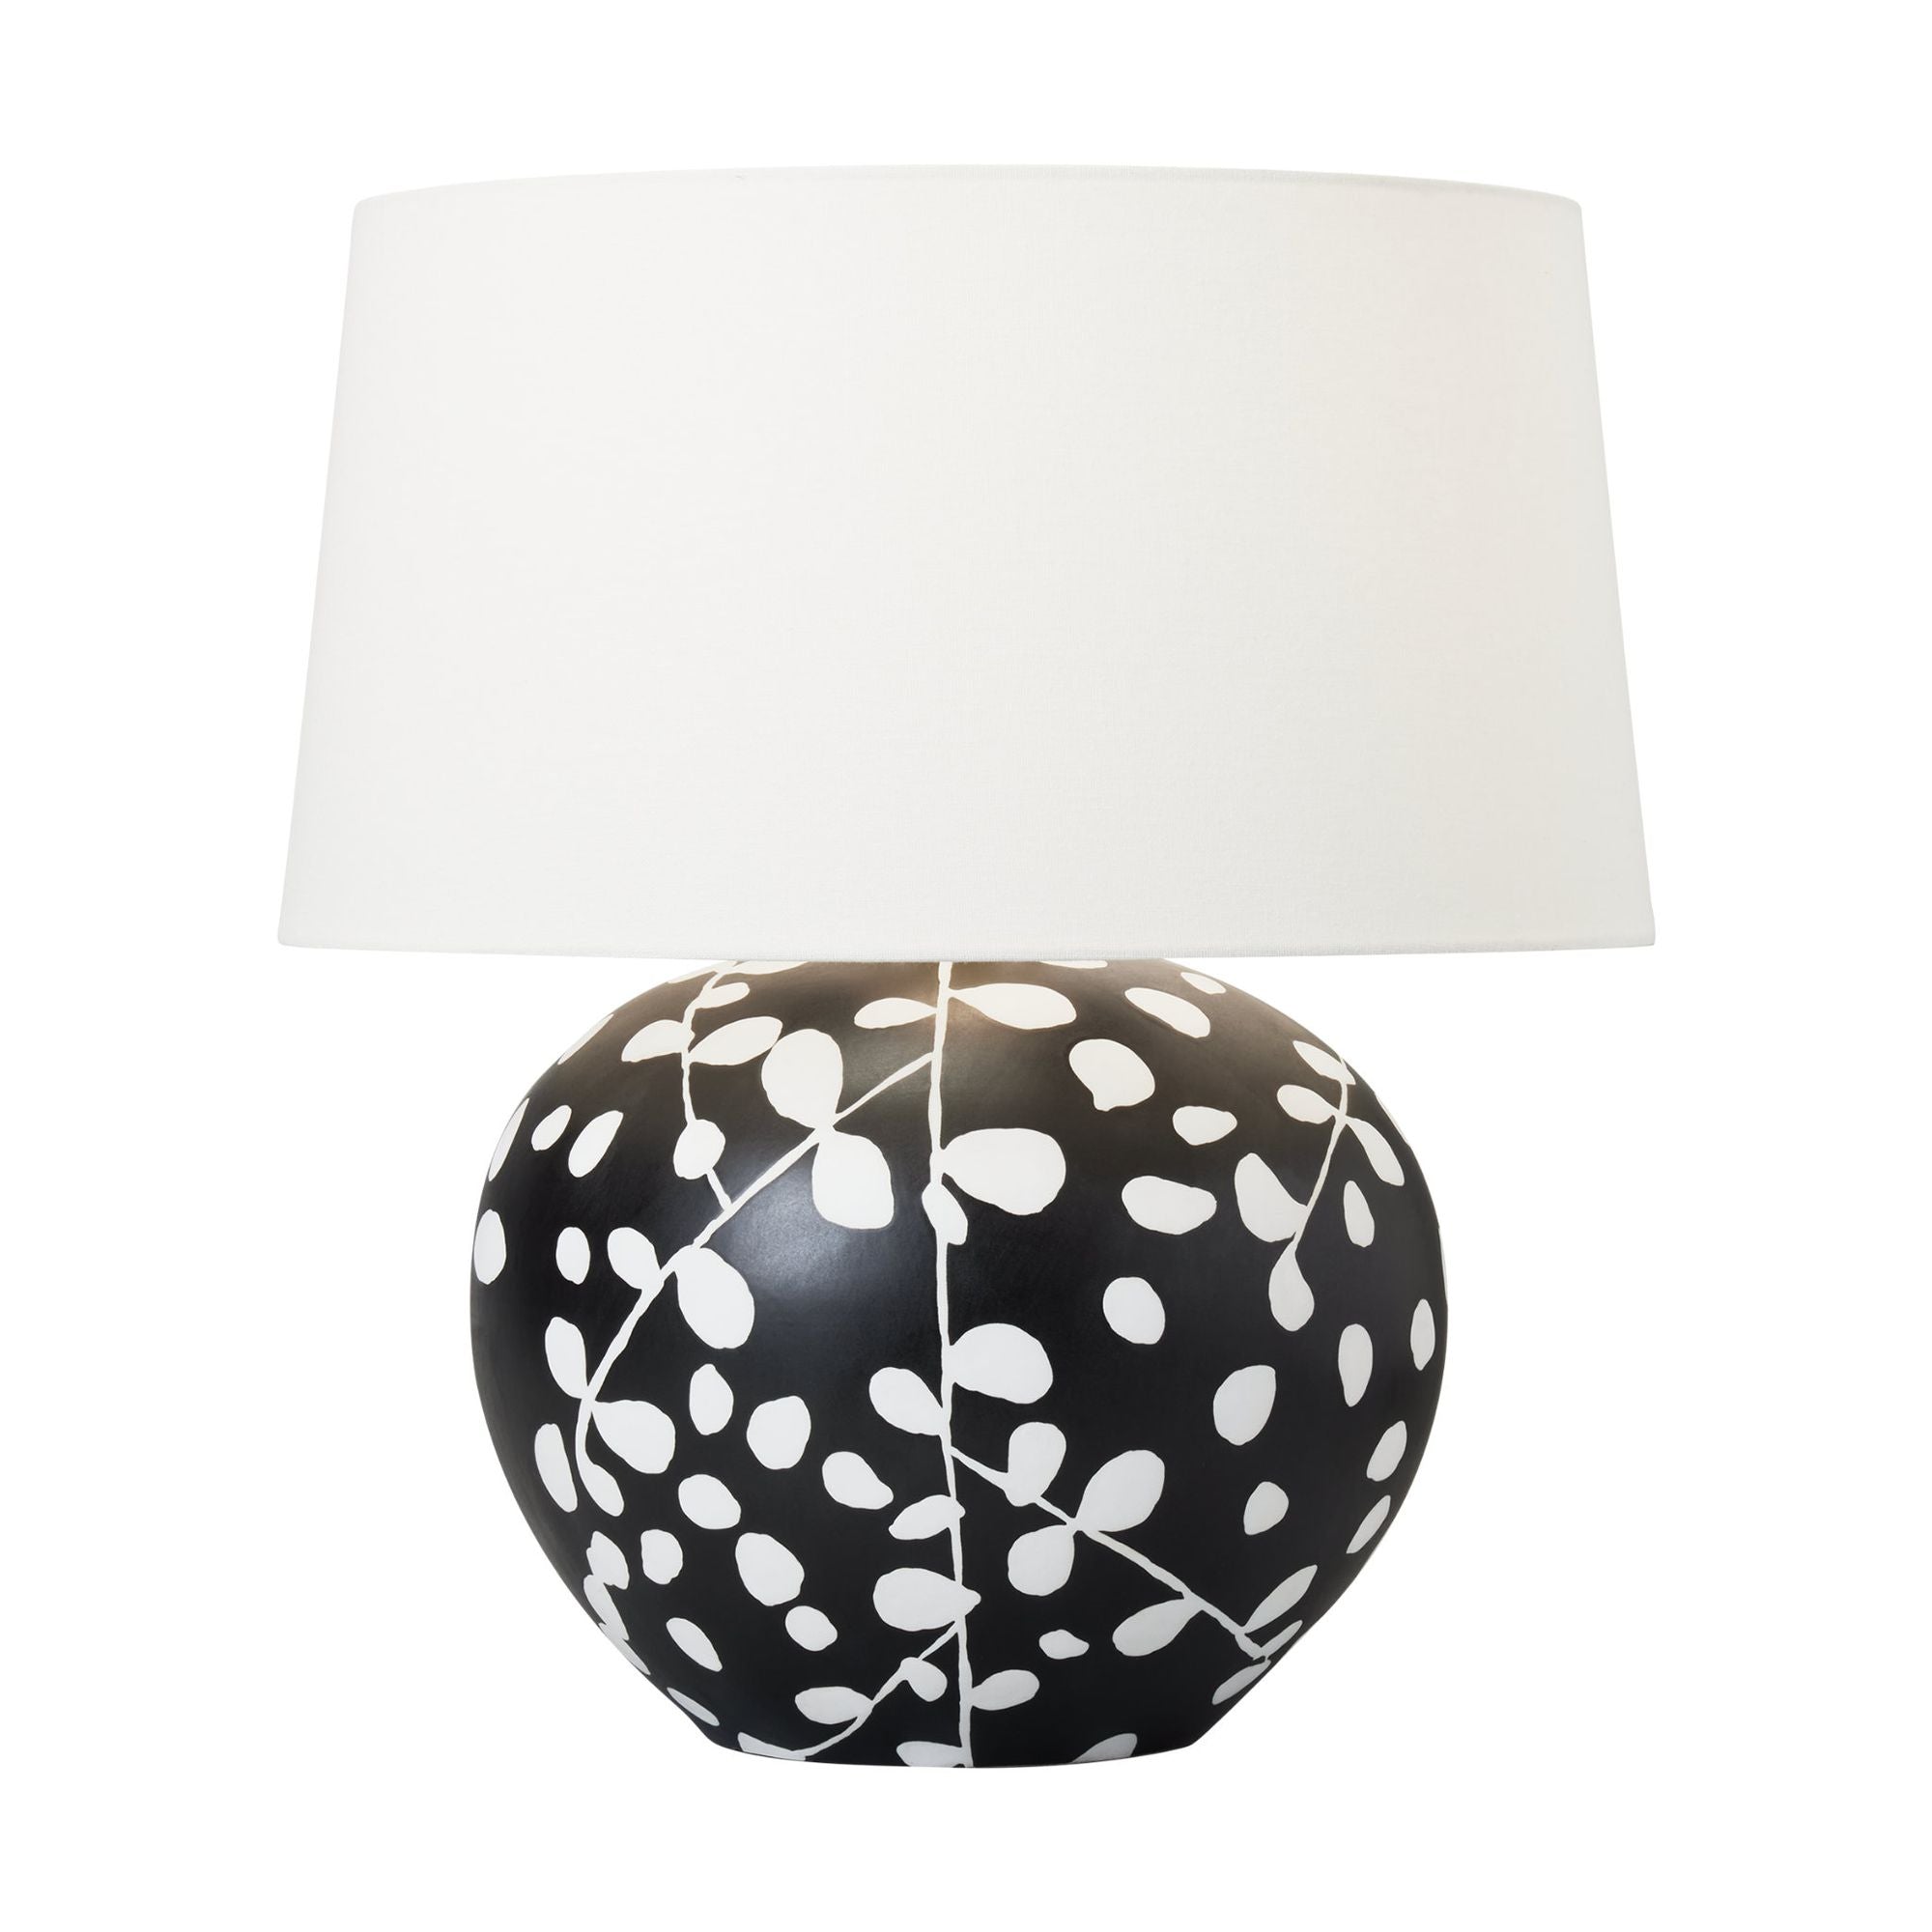 Hable Nan Table Lamp in White Leather W Black Leather